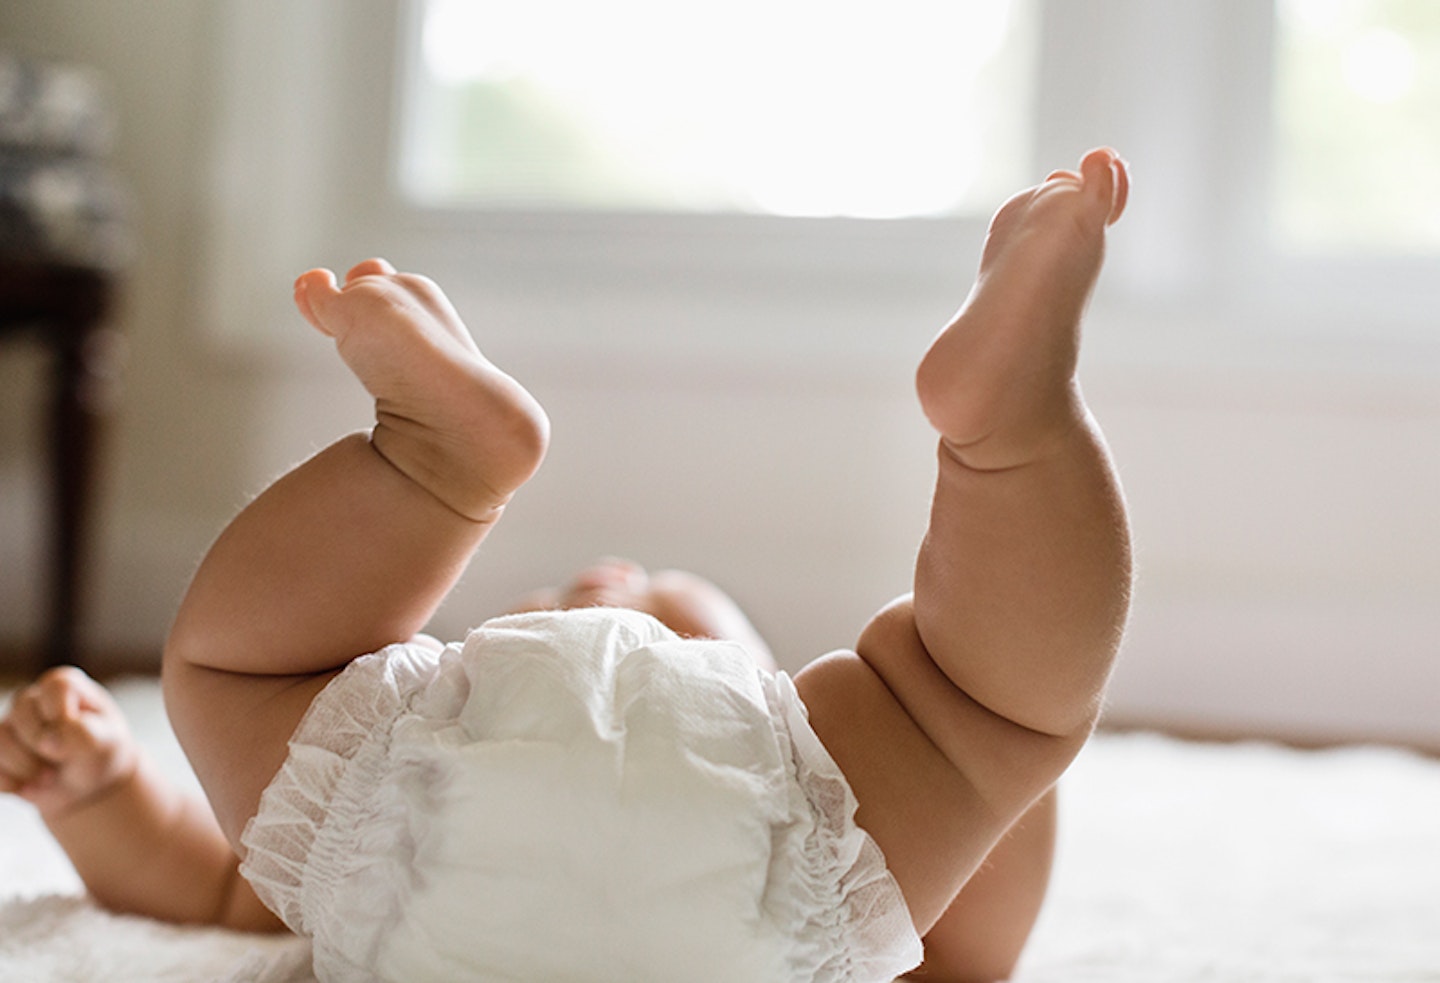 Pampers launches ‘smart nappy’ which alerts you when your baby needs changing